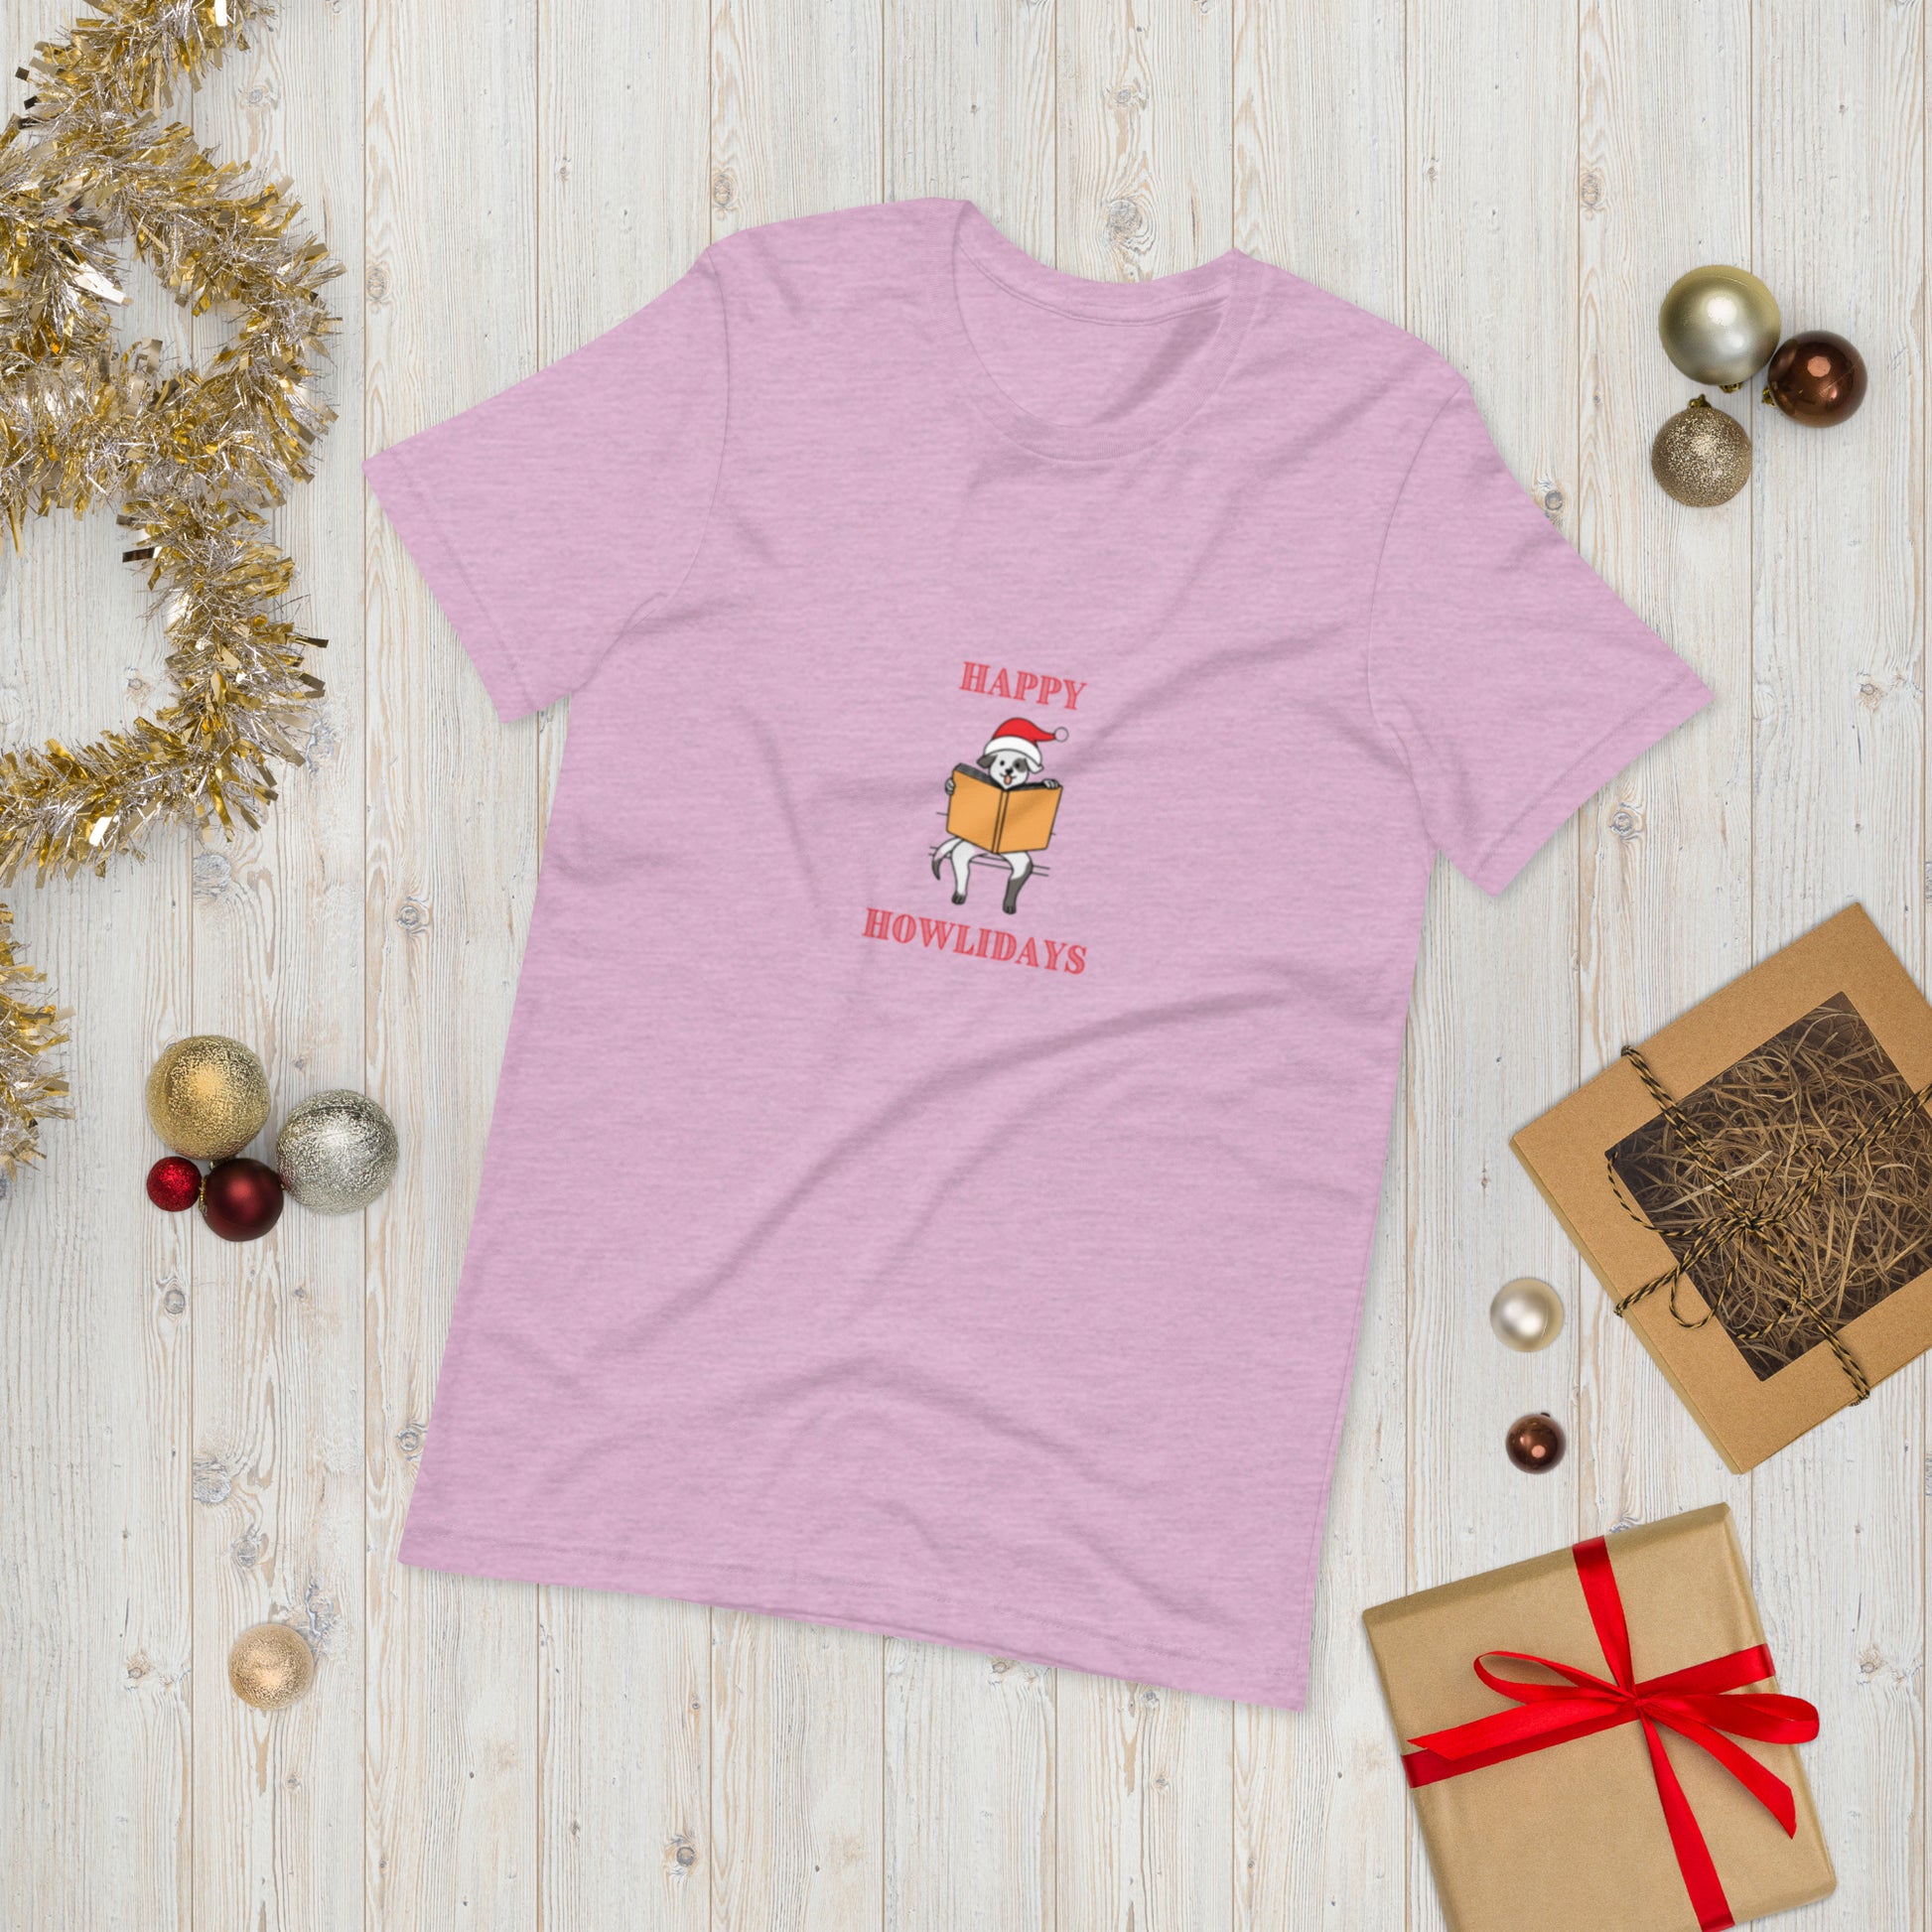 Happy Howlidays Unisex T-Shirt - The Spinster Librarian Shop